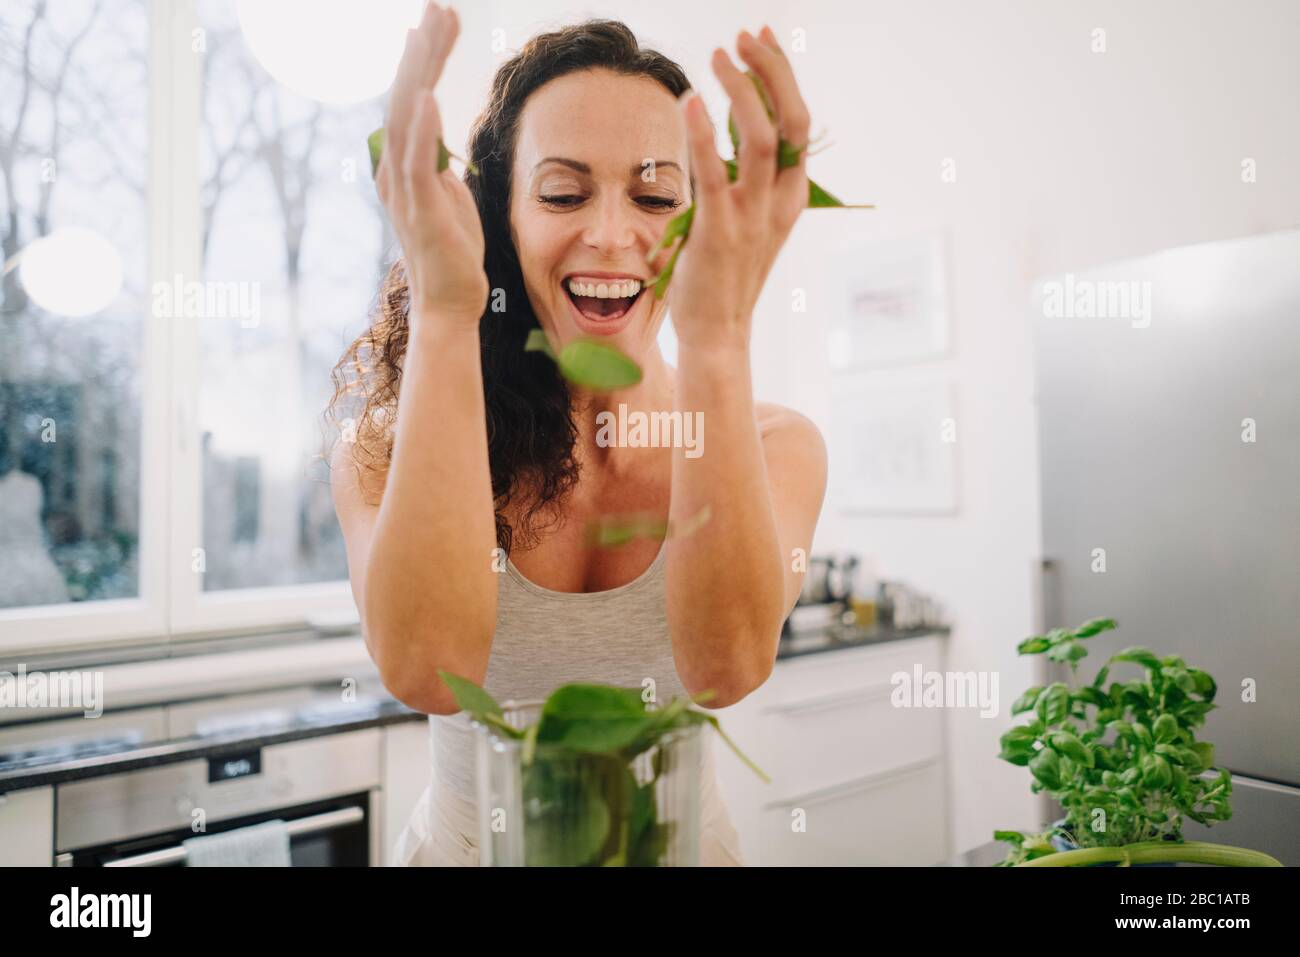 Fit woman standing in kitchen, preparing healthy smoothie, putting ingredients into blender Stock Photo